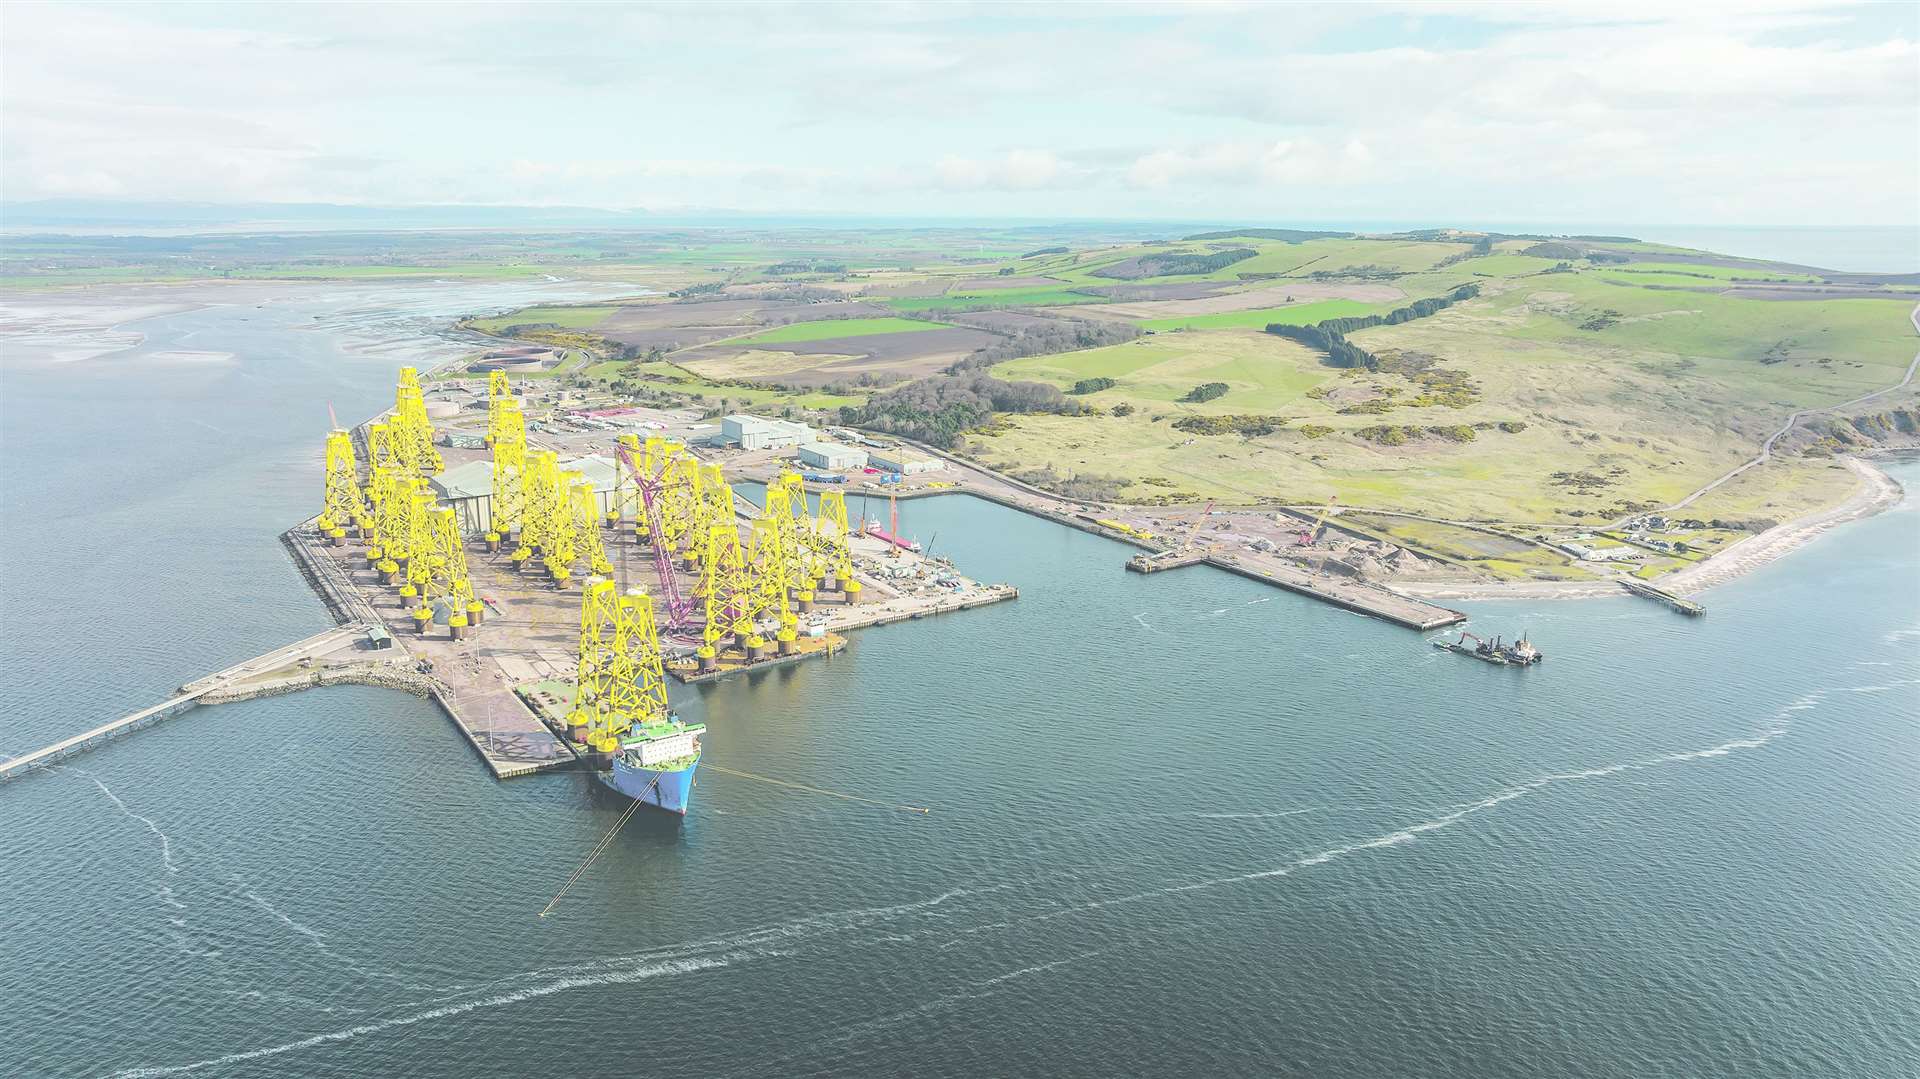 Visitors will have the opportunity to take a look inside the Port of Nigg.